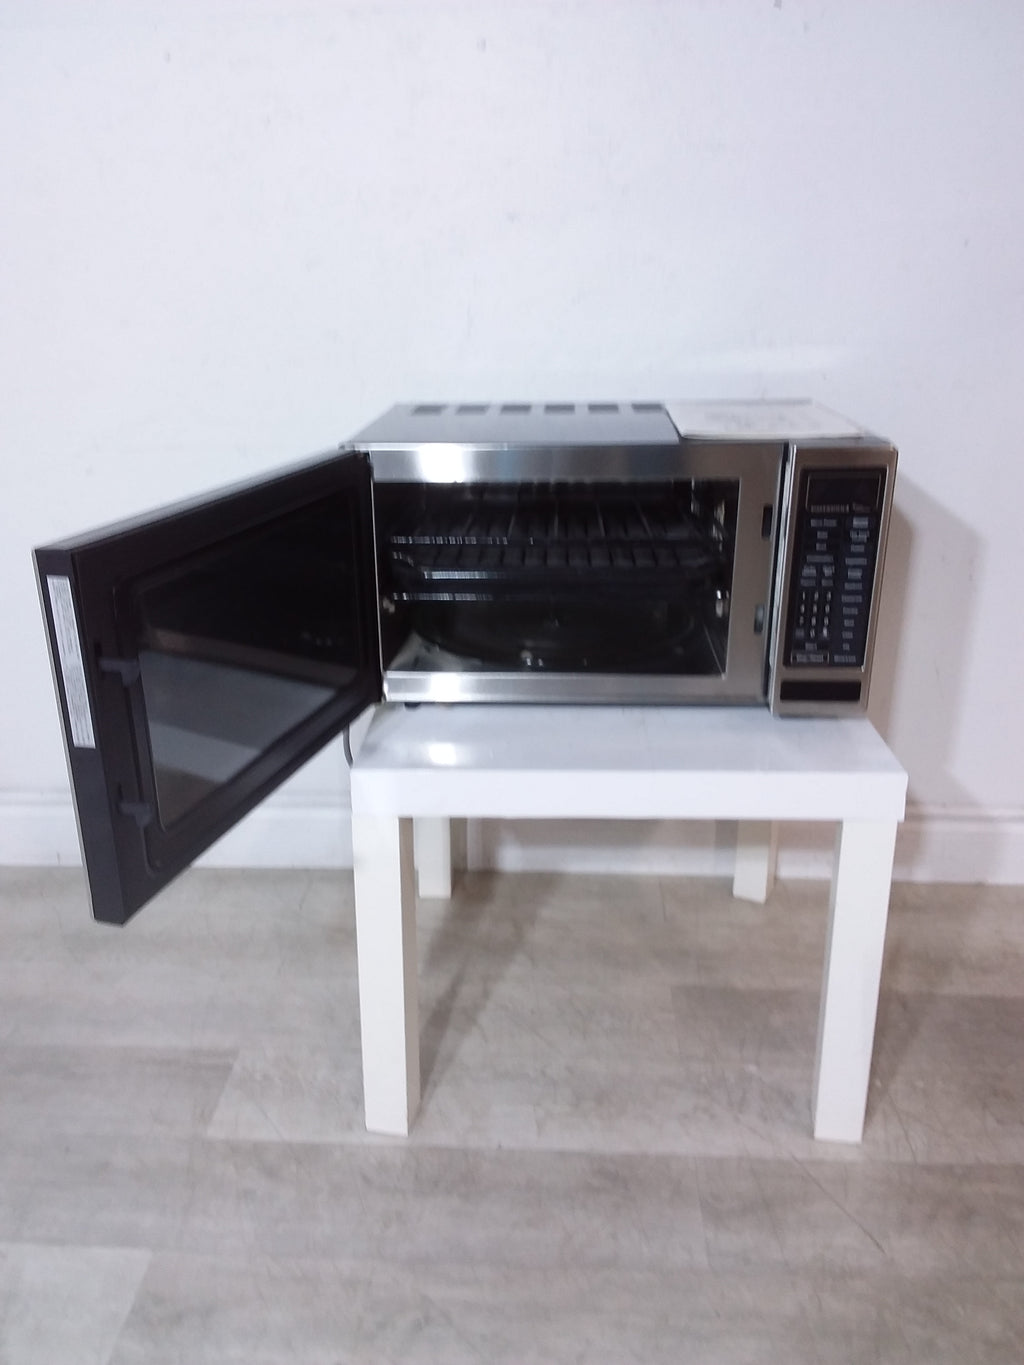 1500 W Convection Microwave